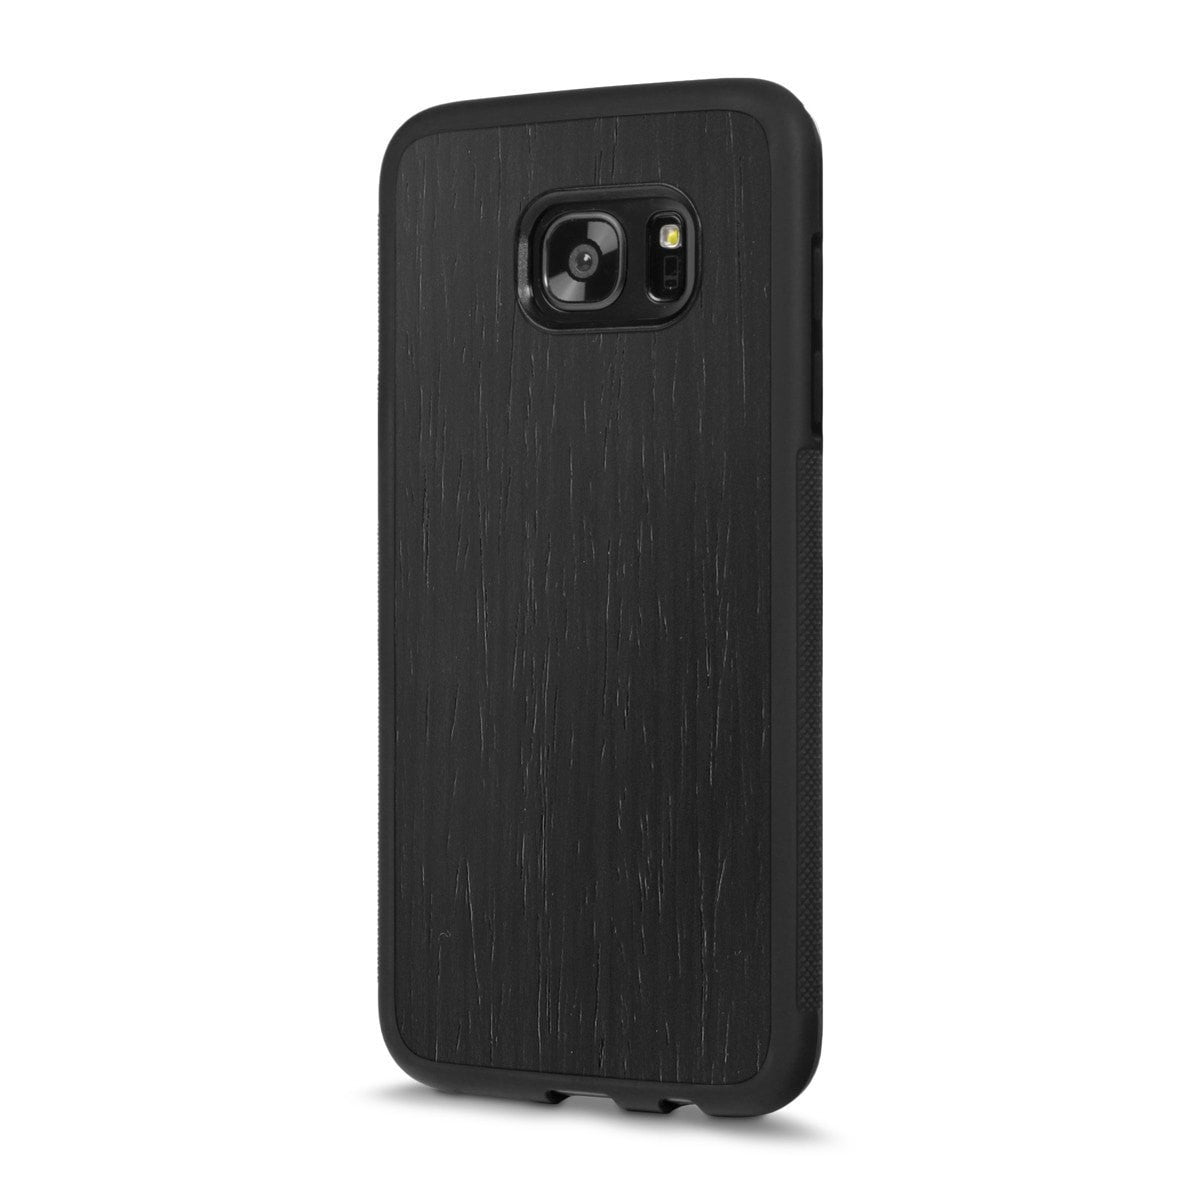  Samsung Galaxy S7 Edge — #WoodBack Explorer Case - Cover-Up - 1